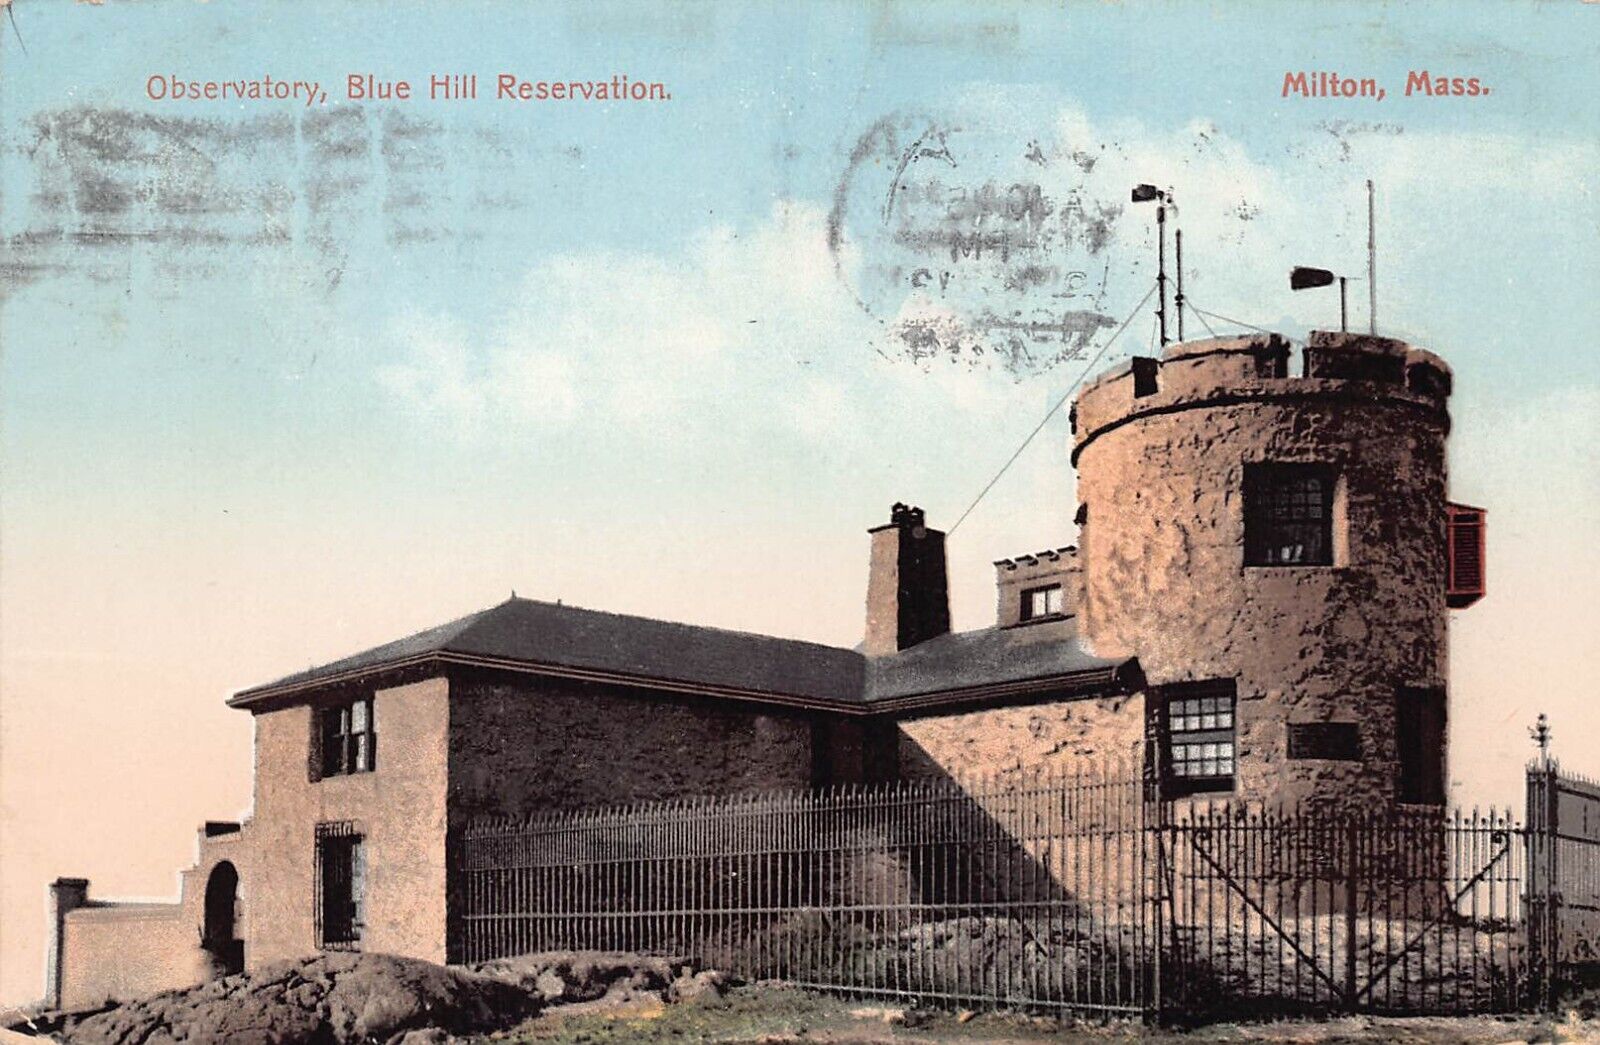 Milton MA Observatory Blue Hill Reservation Meteorology Astronomy Postcard C34